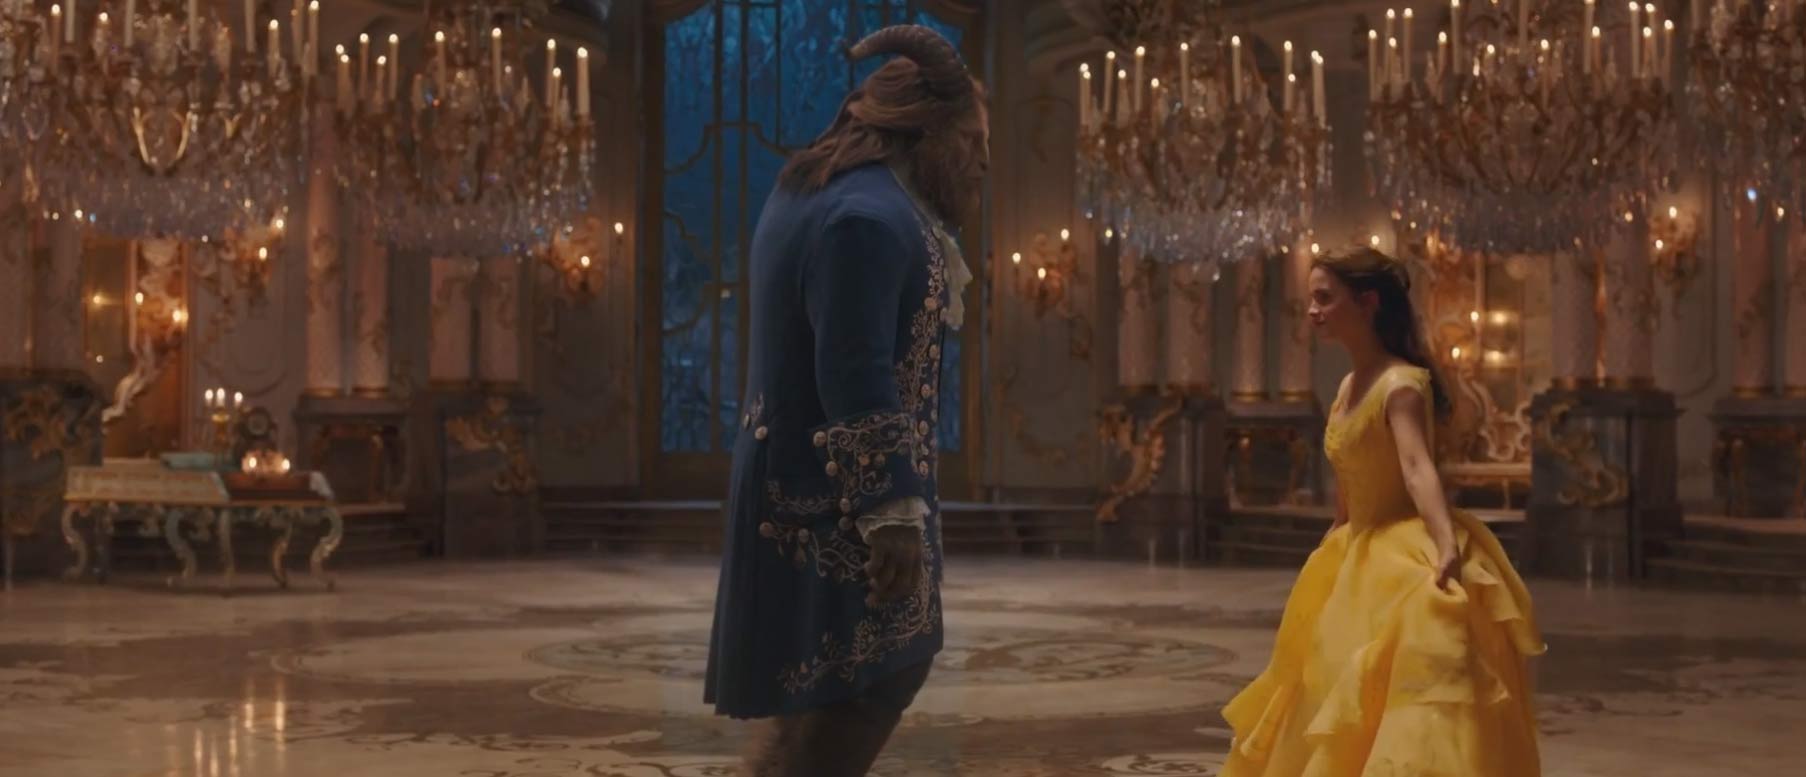 Beauty and the Beast Feature Trailer Screen shot 2